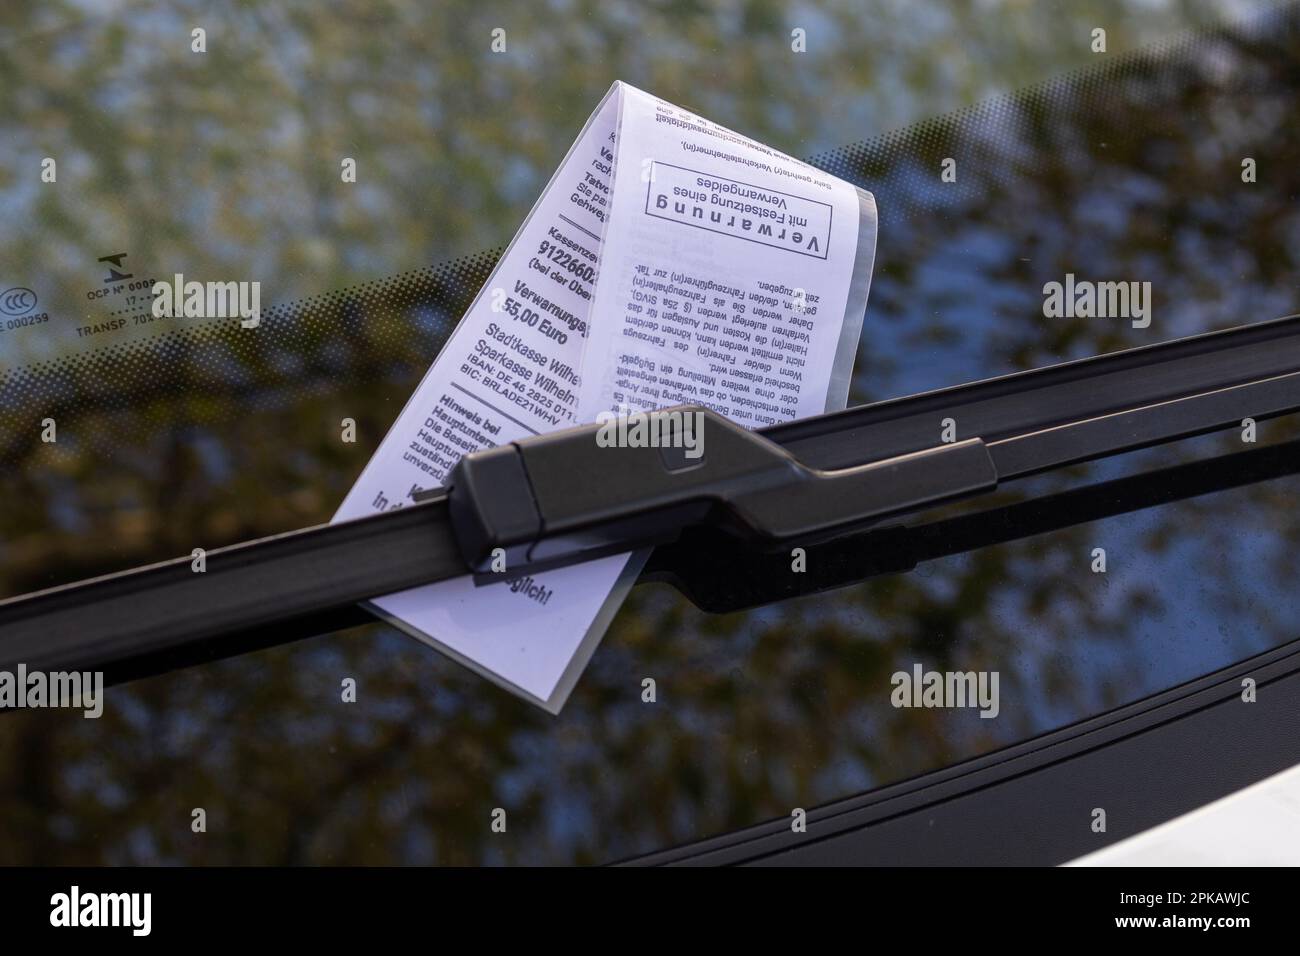 Demand for payment on the windshield of a car, parking ticket for illegal parking on the sidewalk, 55.00 euros, autumn leaves, symbol image, Wilhelmshaven, Lower Saxony, Germany Stock Photo